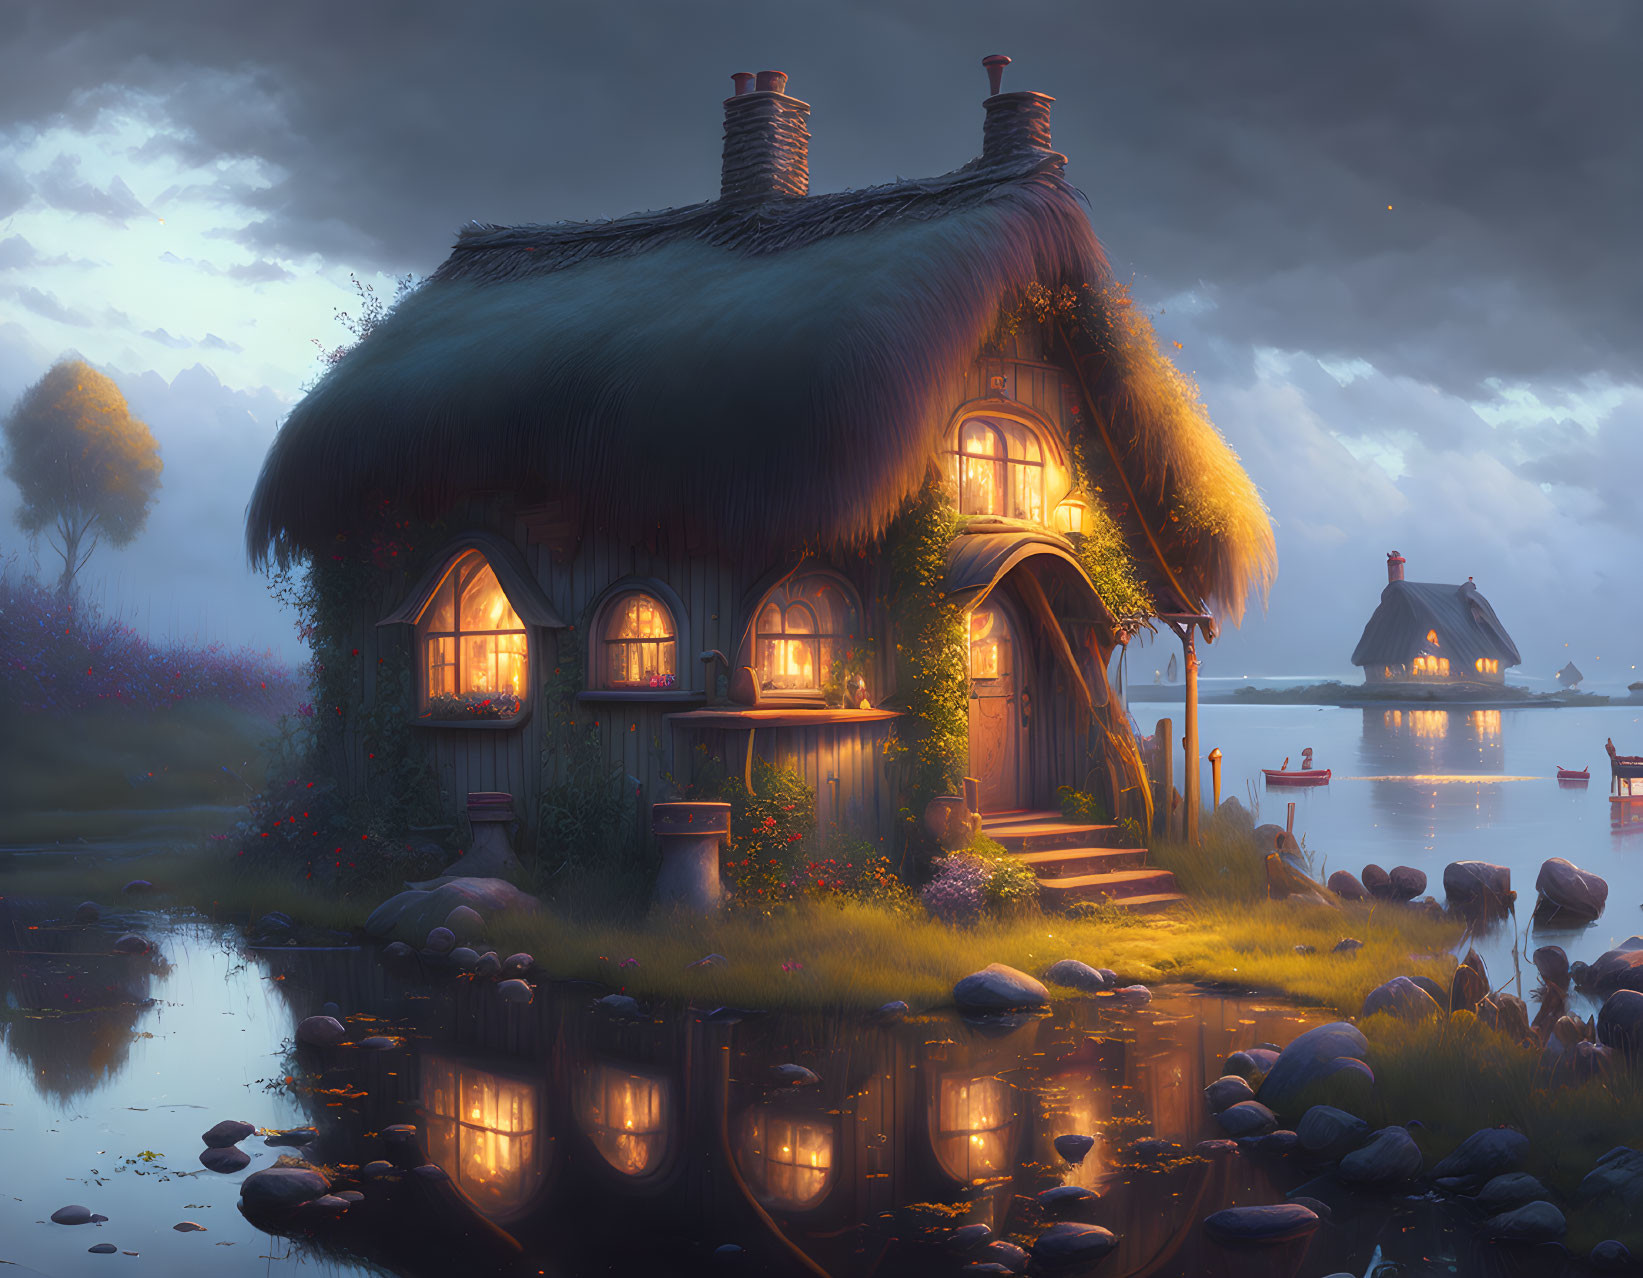 Thatched Roof Cottage by Calm Lake at Dusk